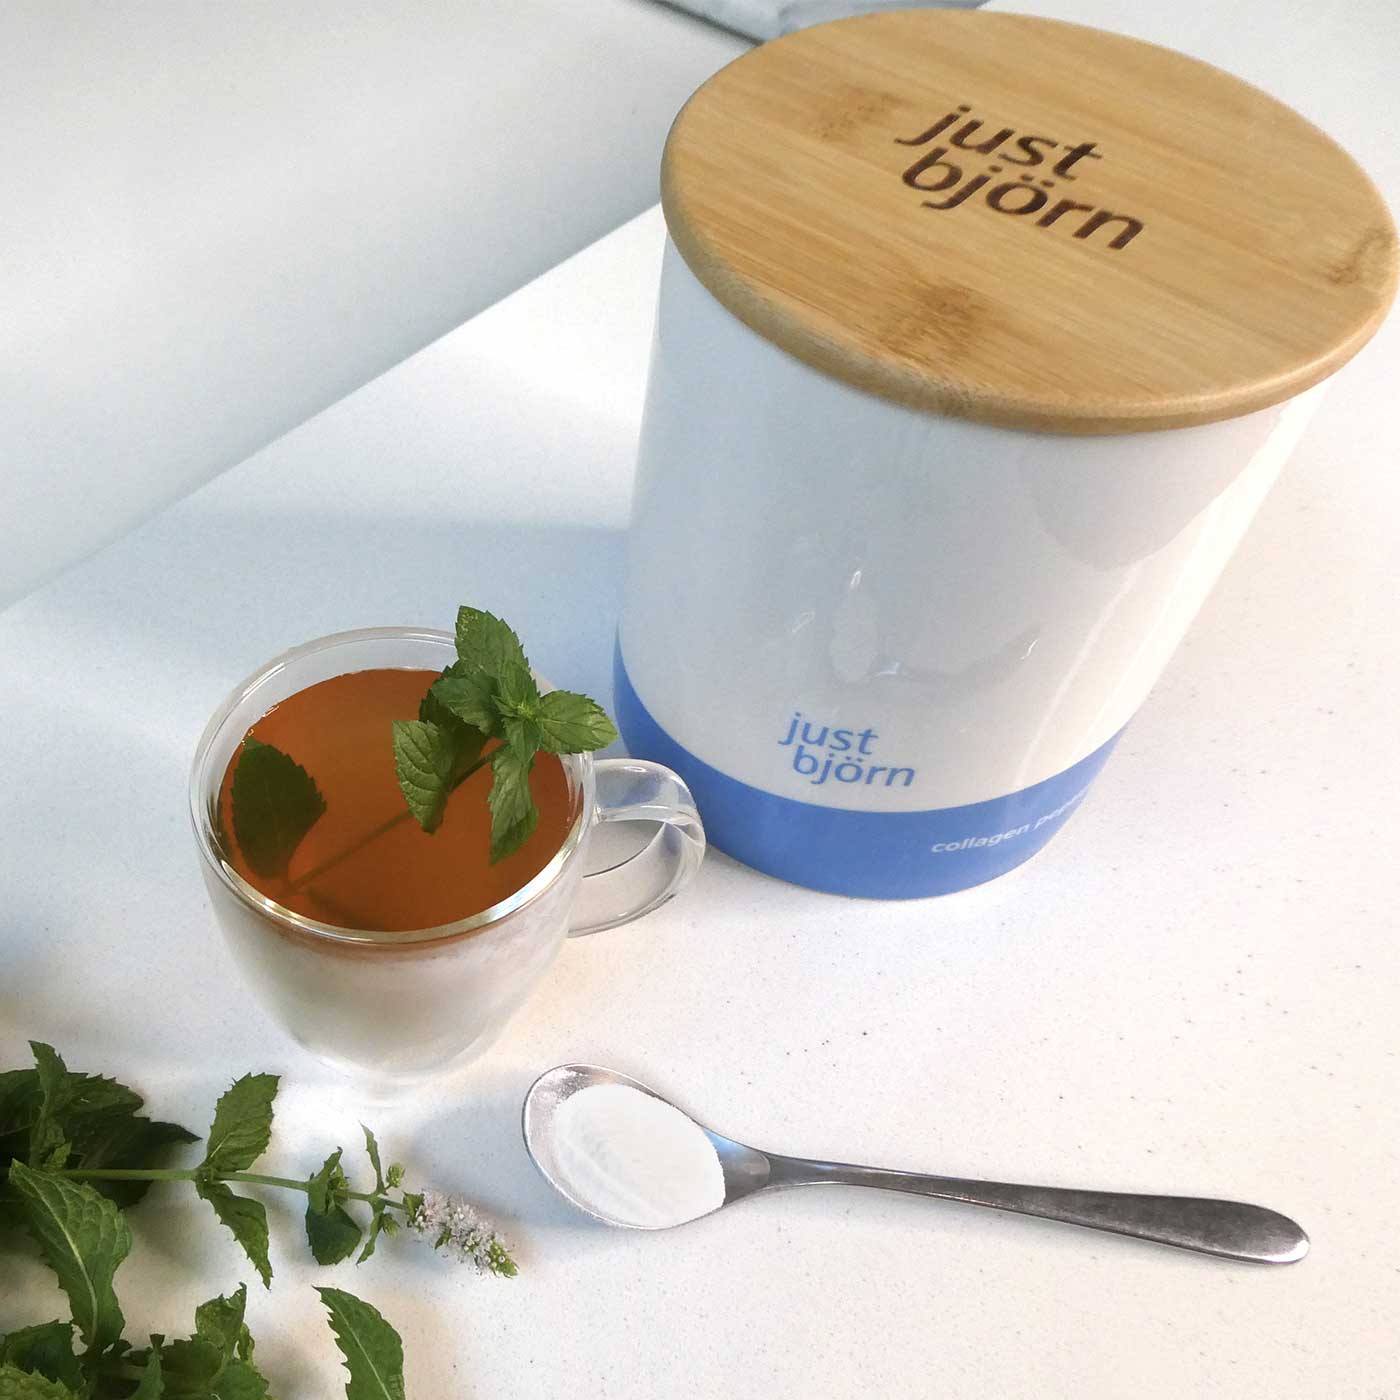 Cup of mint tea with spoonful of just björn marine collagen and ceramic canister